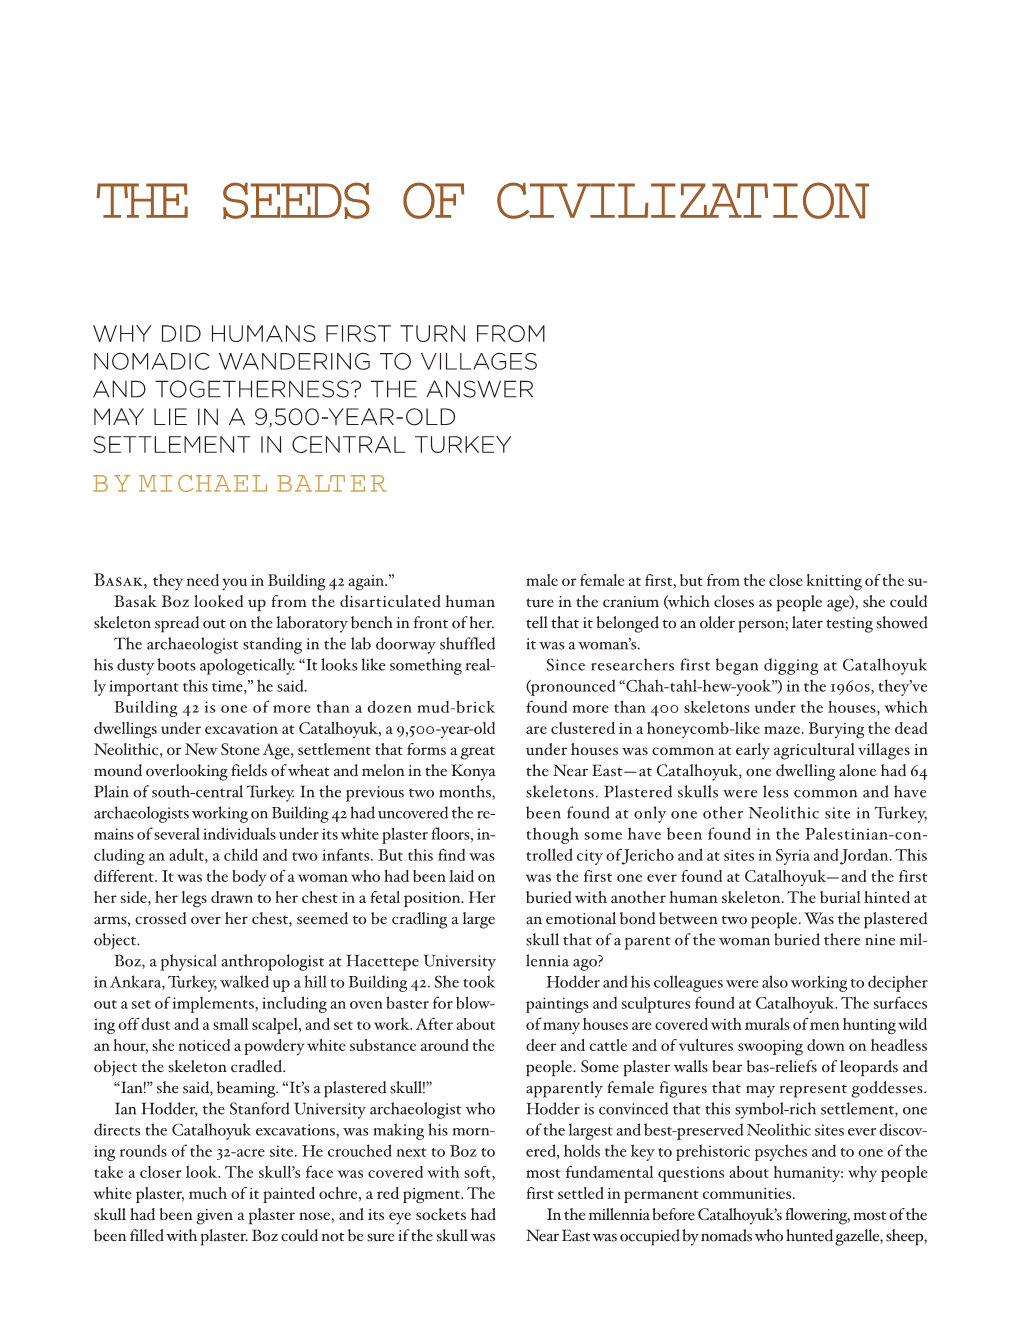 The Seeds of Civilization